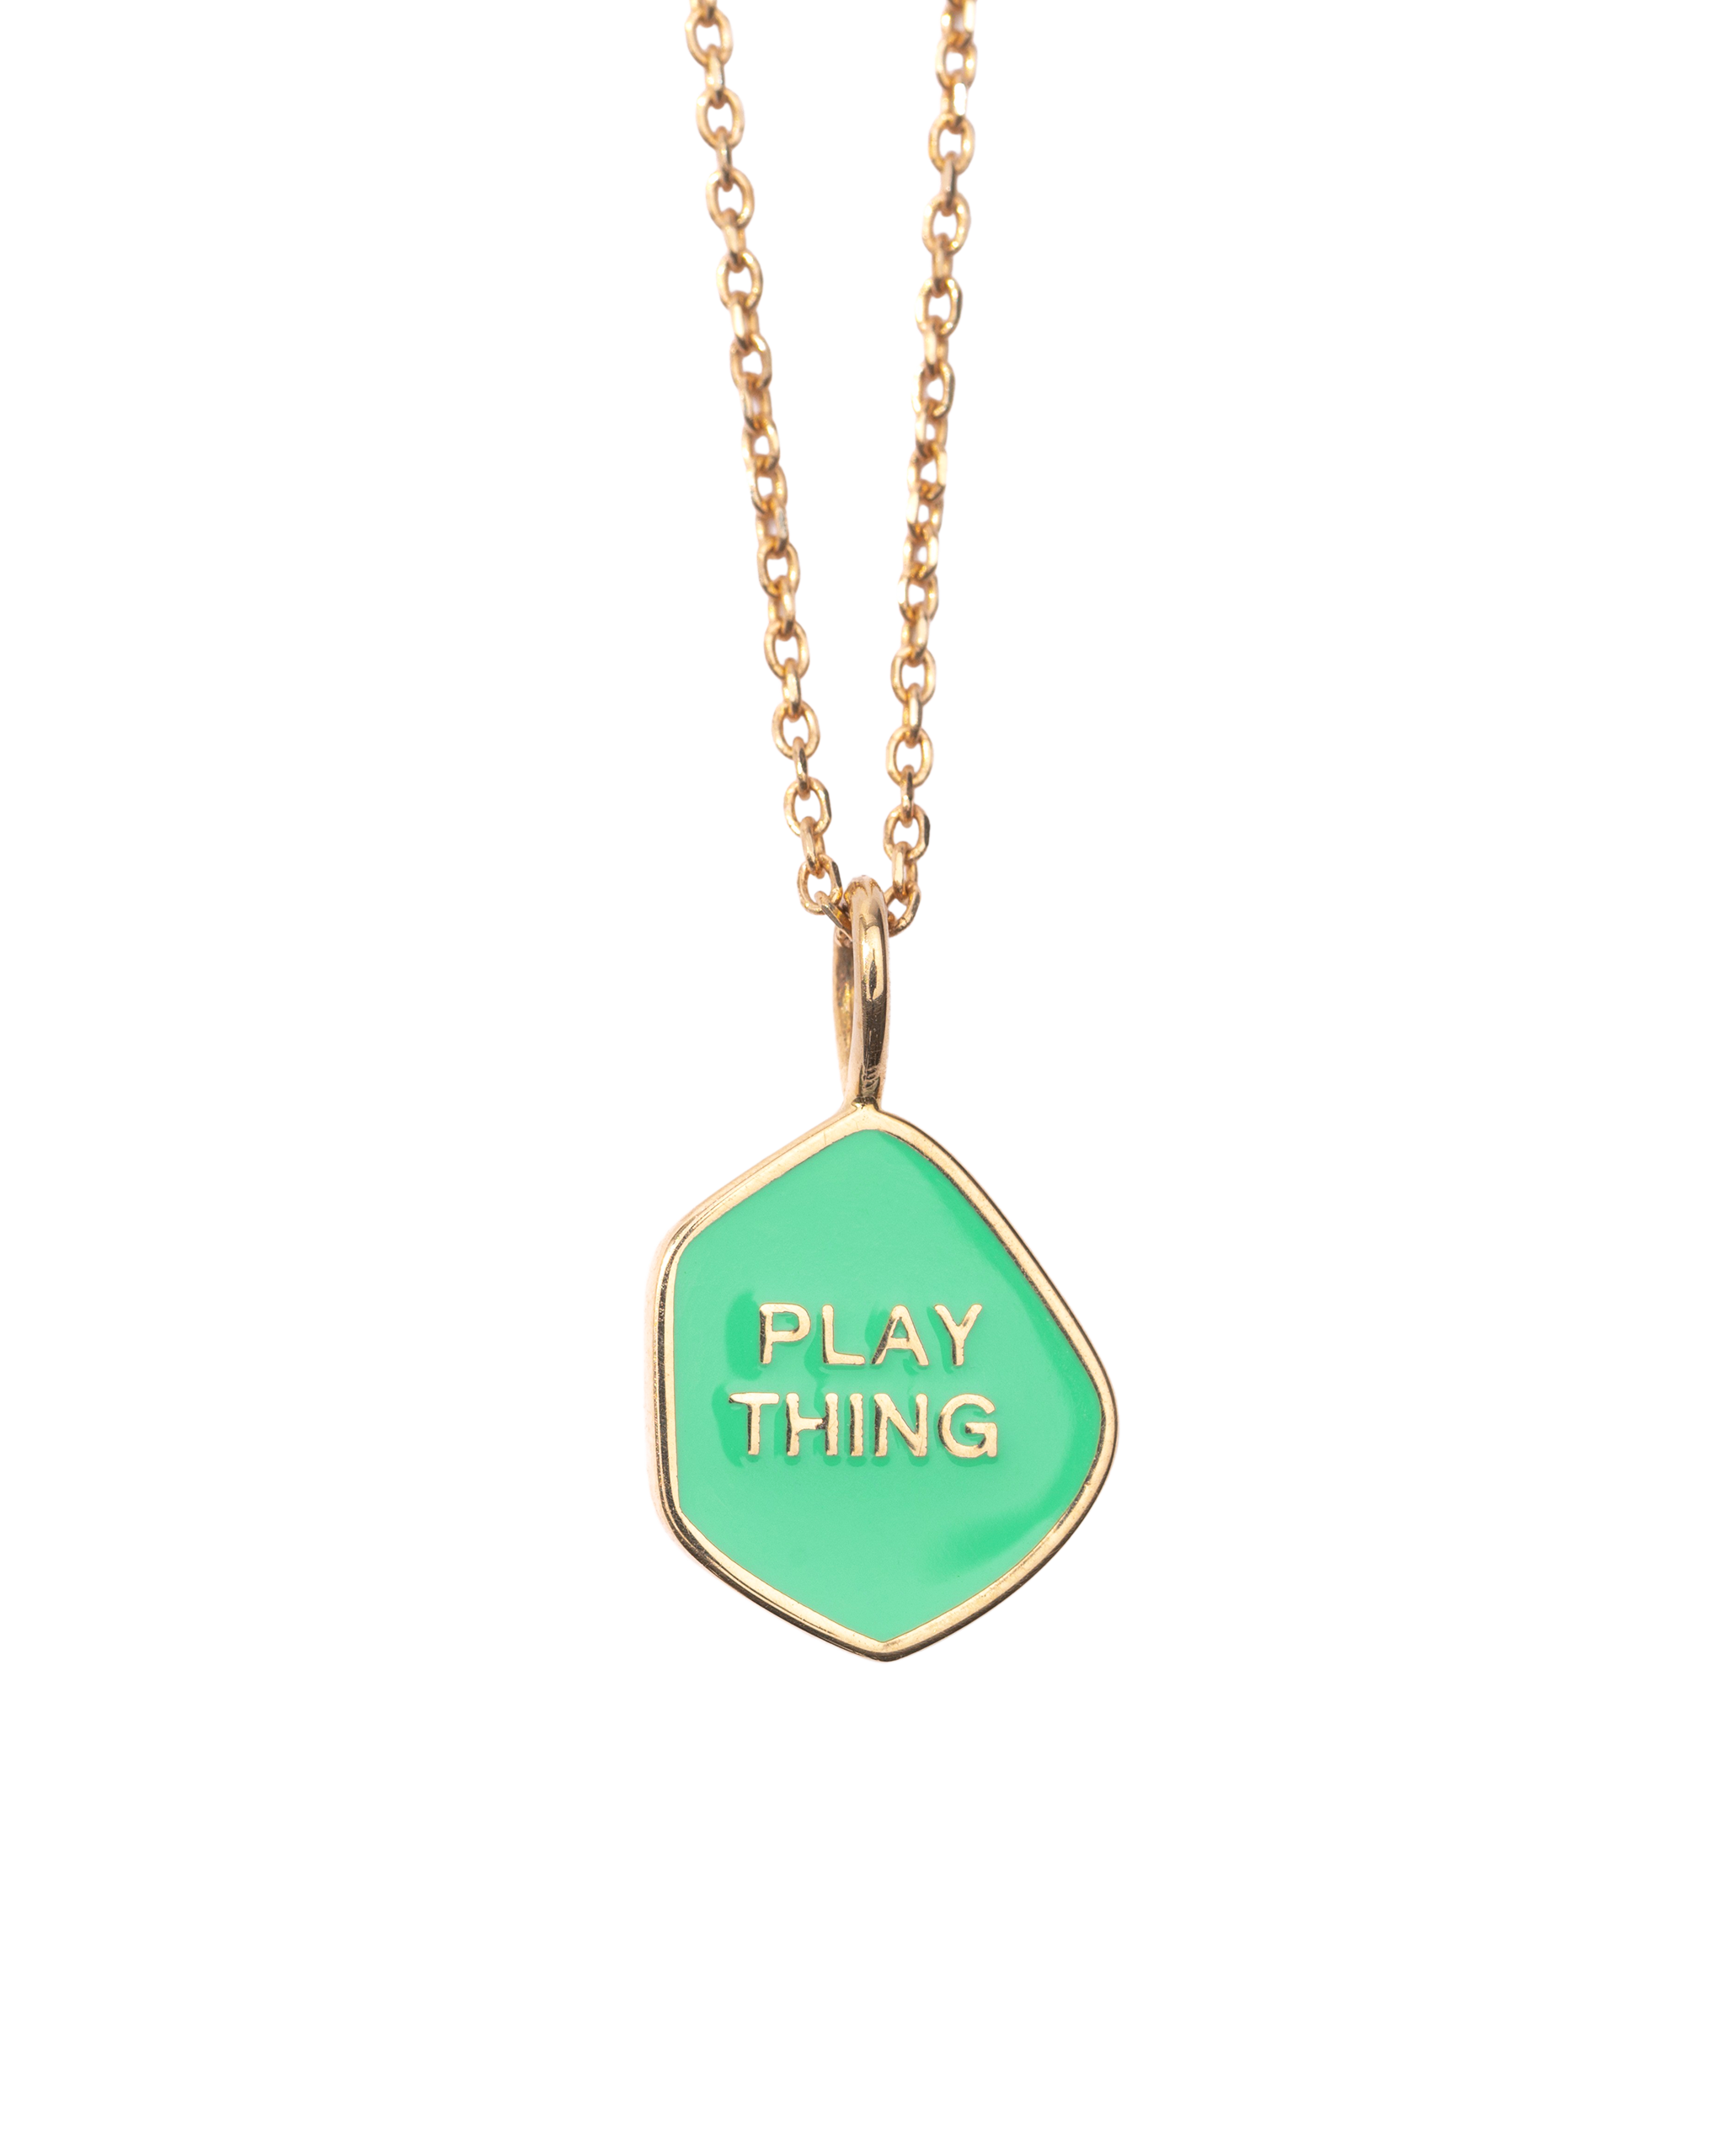 The "Play Thing" Necklace